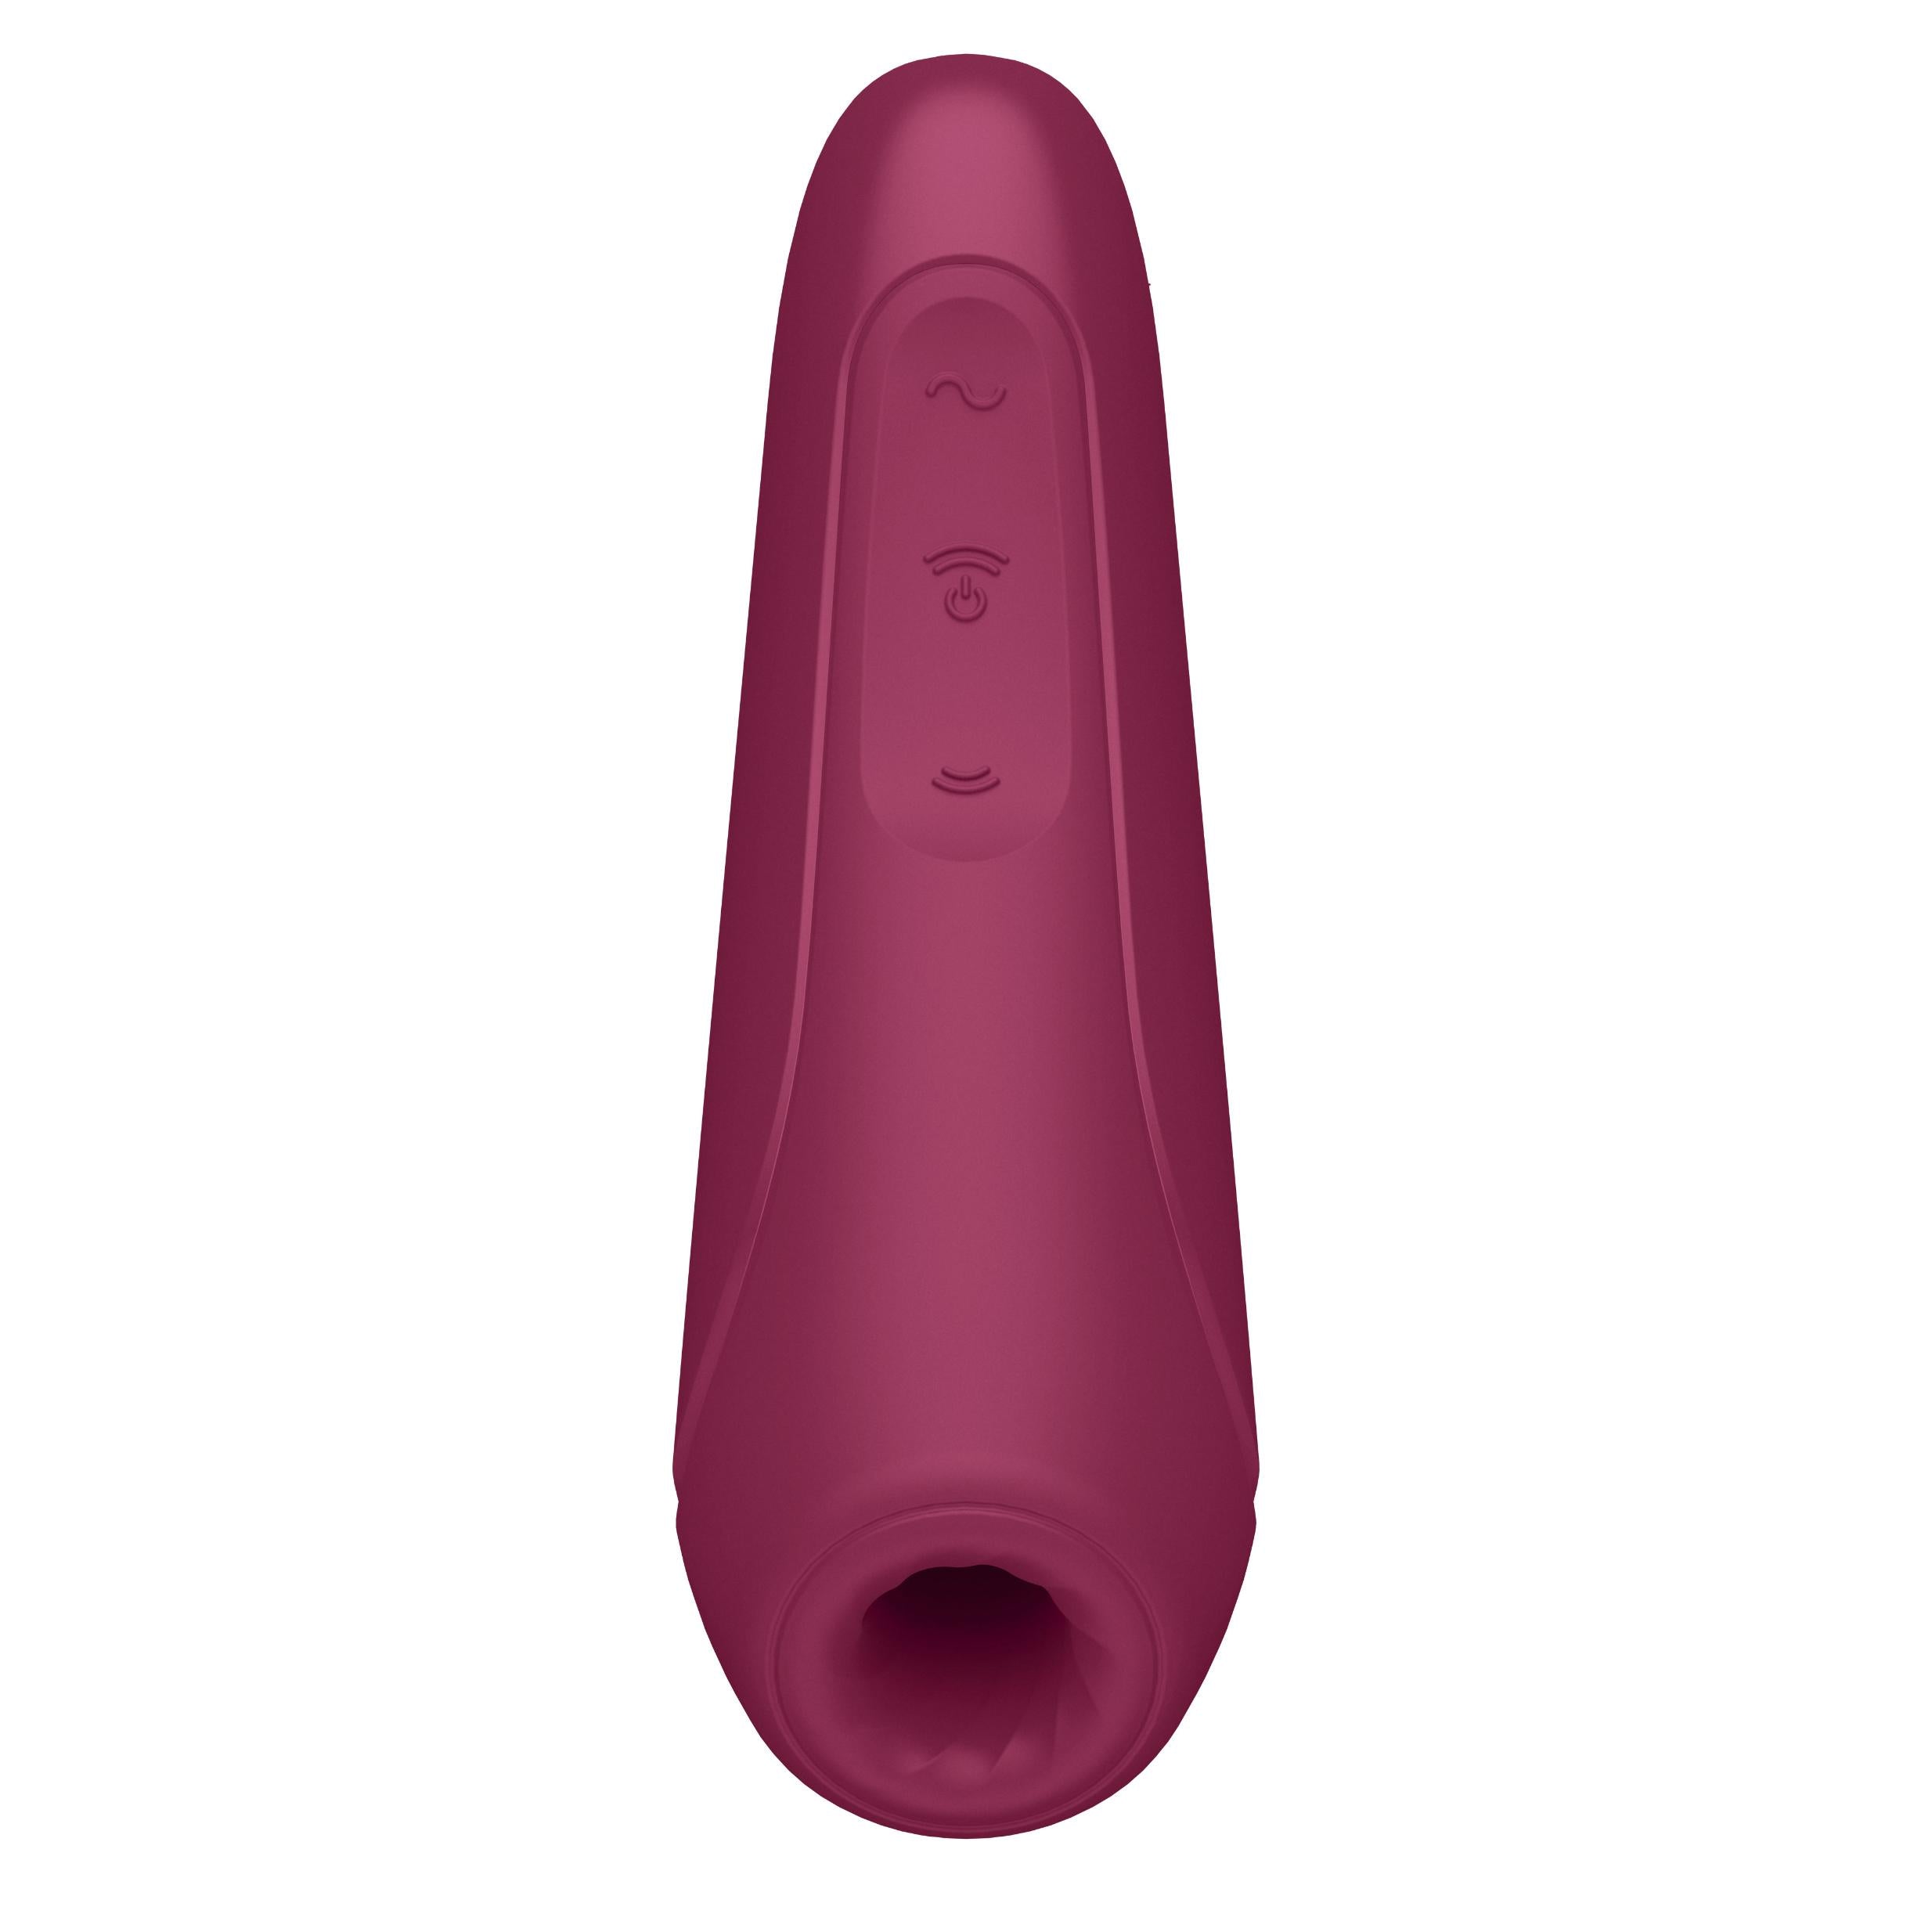 Satisfyer Curvy 1+ - The Ultimate Clit Vibrator